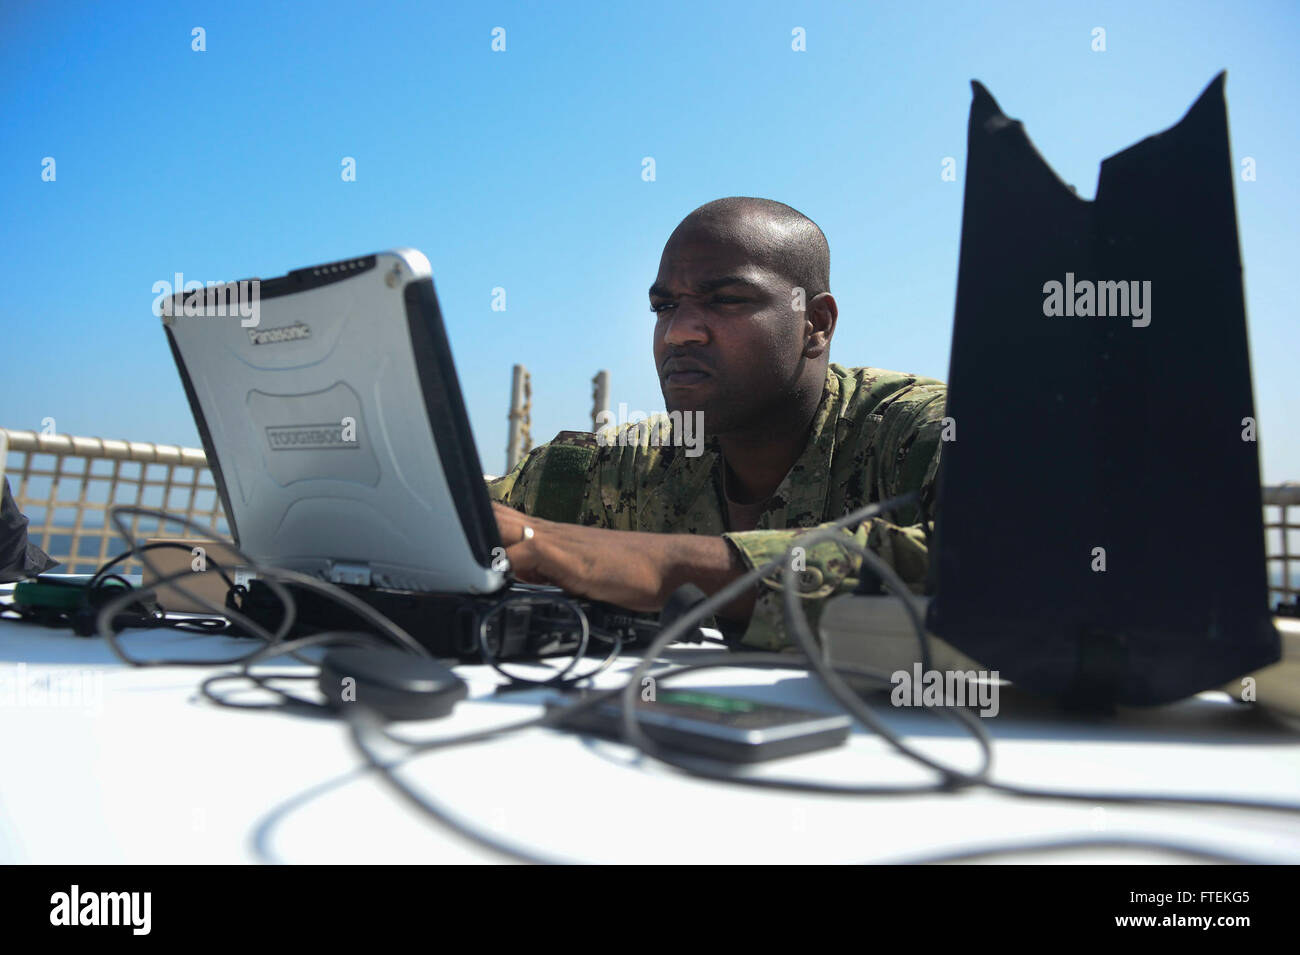 150126-N-RB579-088 ATLANTIC OCEAN (Jan. 26, 2015) Chief Operations Specialist Dwayne Brown, from Brooklyn, New York, conducts unmanned aerial vehicle operations aboard the Military Sealift Command’s joint high-speed vessel USNS Spearhead (JHSV 1) Jan 26, 2015. Spearhead is on a scheduled deployment to the U.S. 6th Fleet area of operations in support of the international collaborative capacity-building program Africa Partnership Station. (U.S. Navy photo by Mass Communication Specialist 1st Class Joshua Davies/Released) Stock Photo